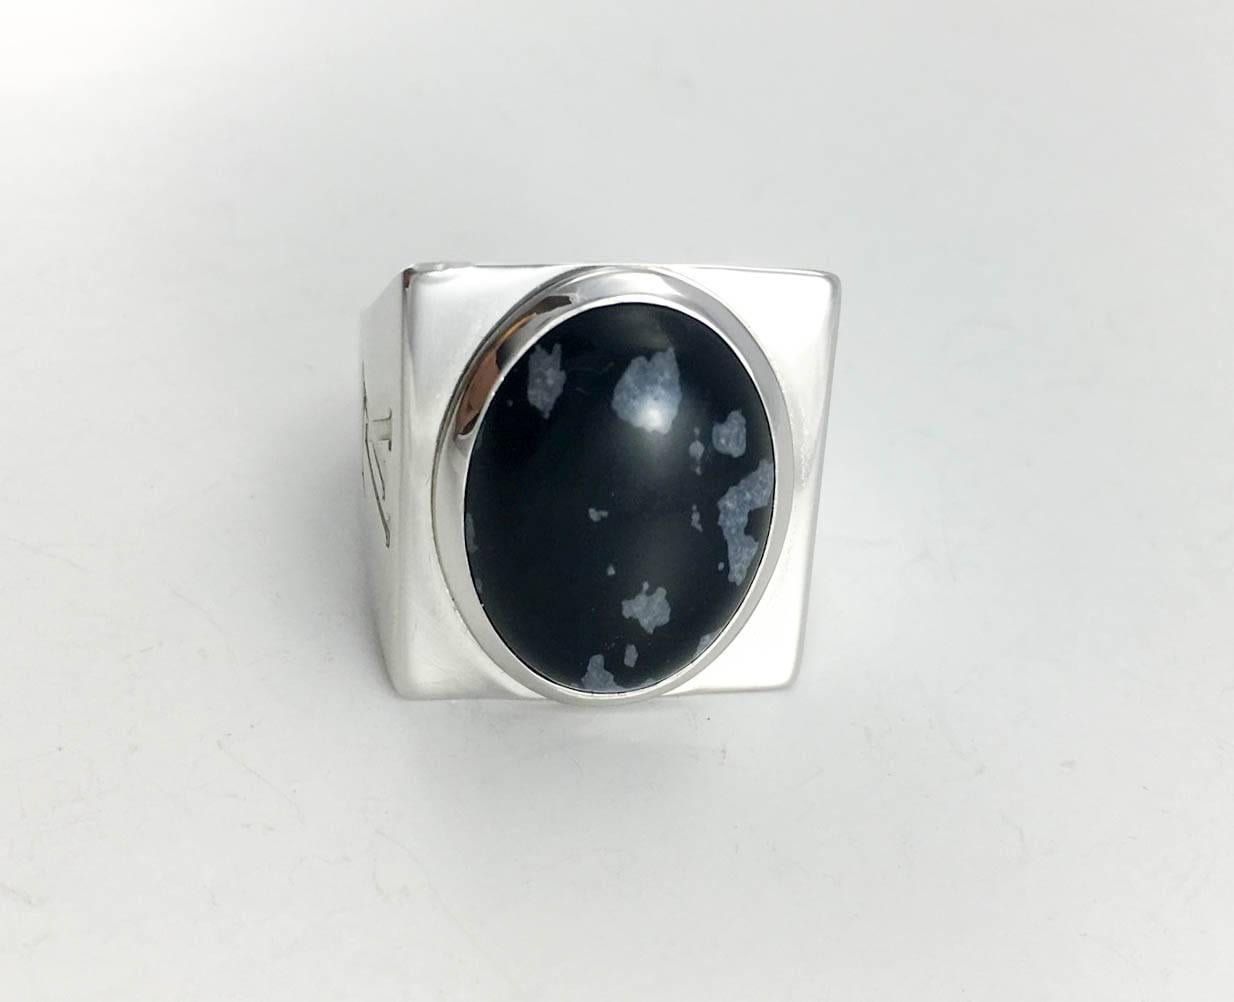 Striking Louis Vuitton Silver and Obsidian Men’s Ring. This gorgeous ring by Louis Vuitton is part of the Snowflake collection and features a large oval black obsidian with grey ‘snowflake’ forms. The design of this substantial ring is geometrical